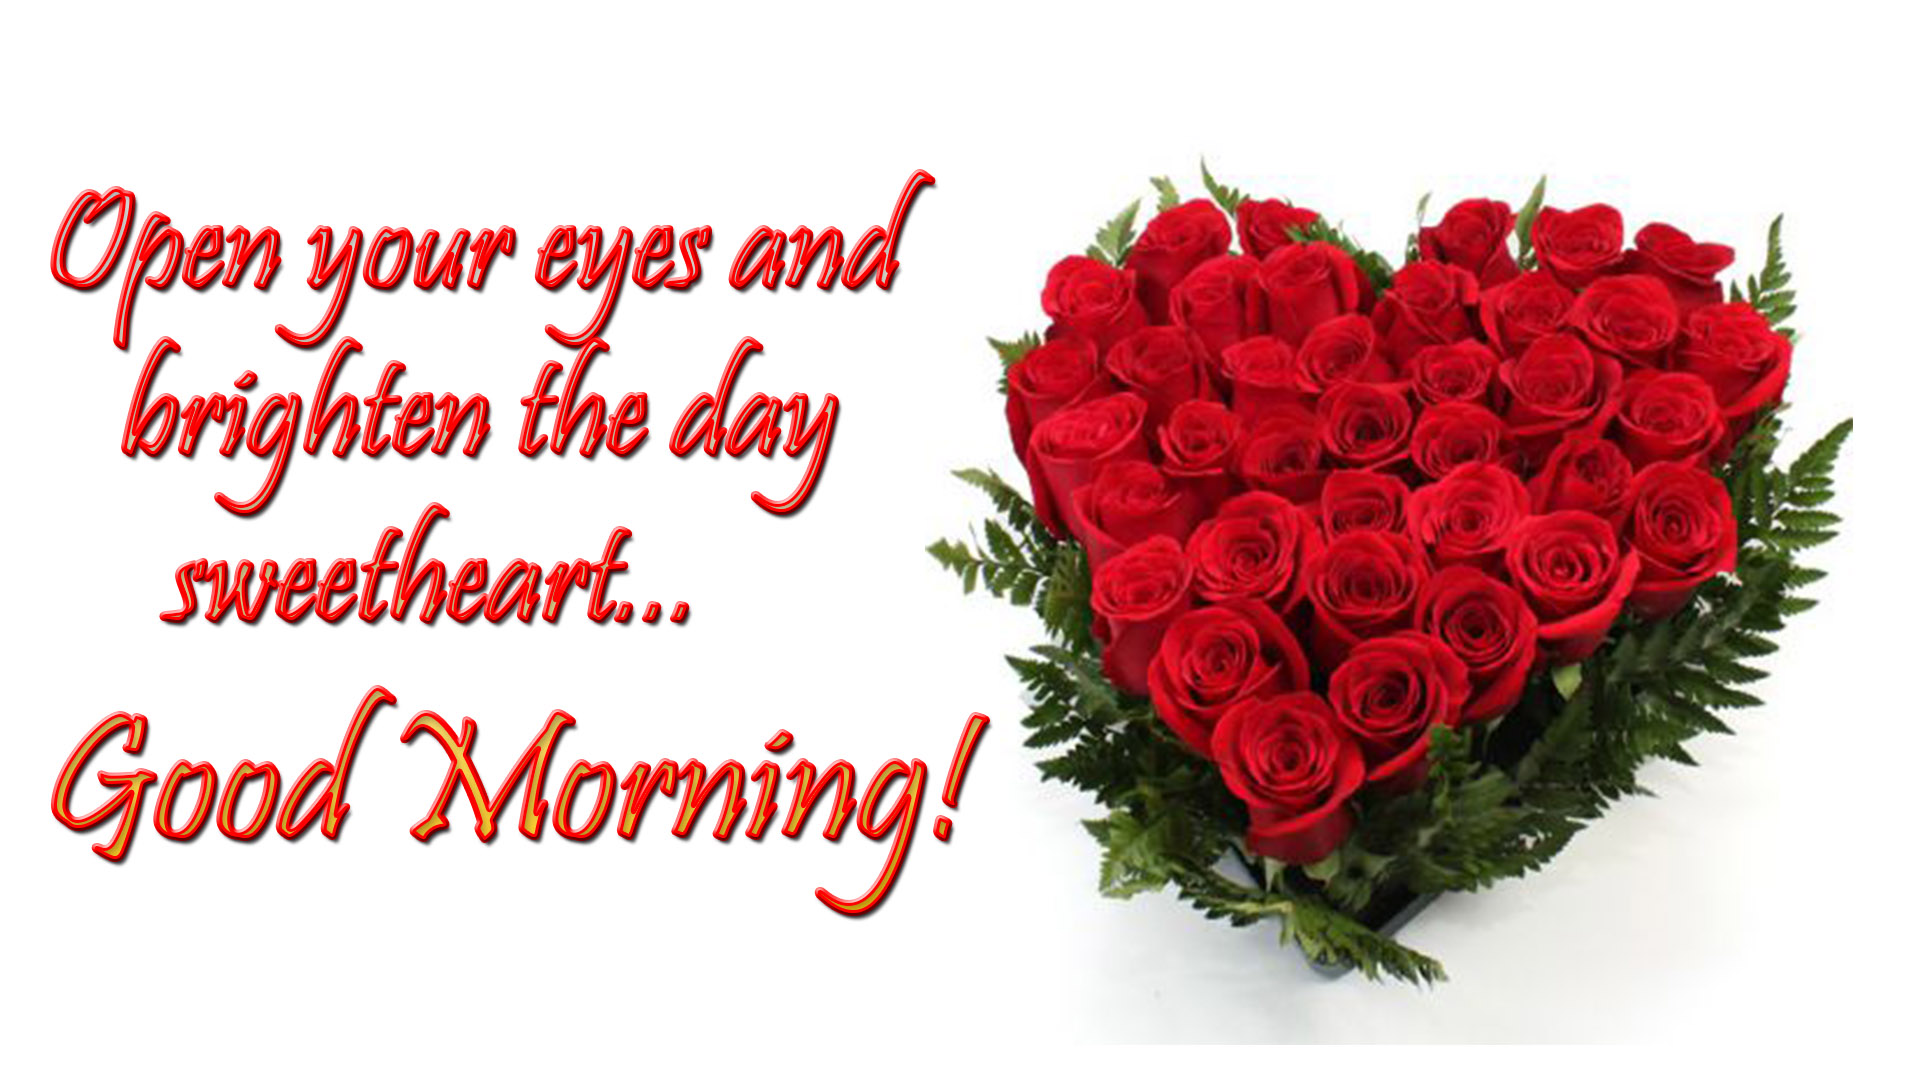 good morning wishes for love